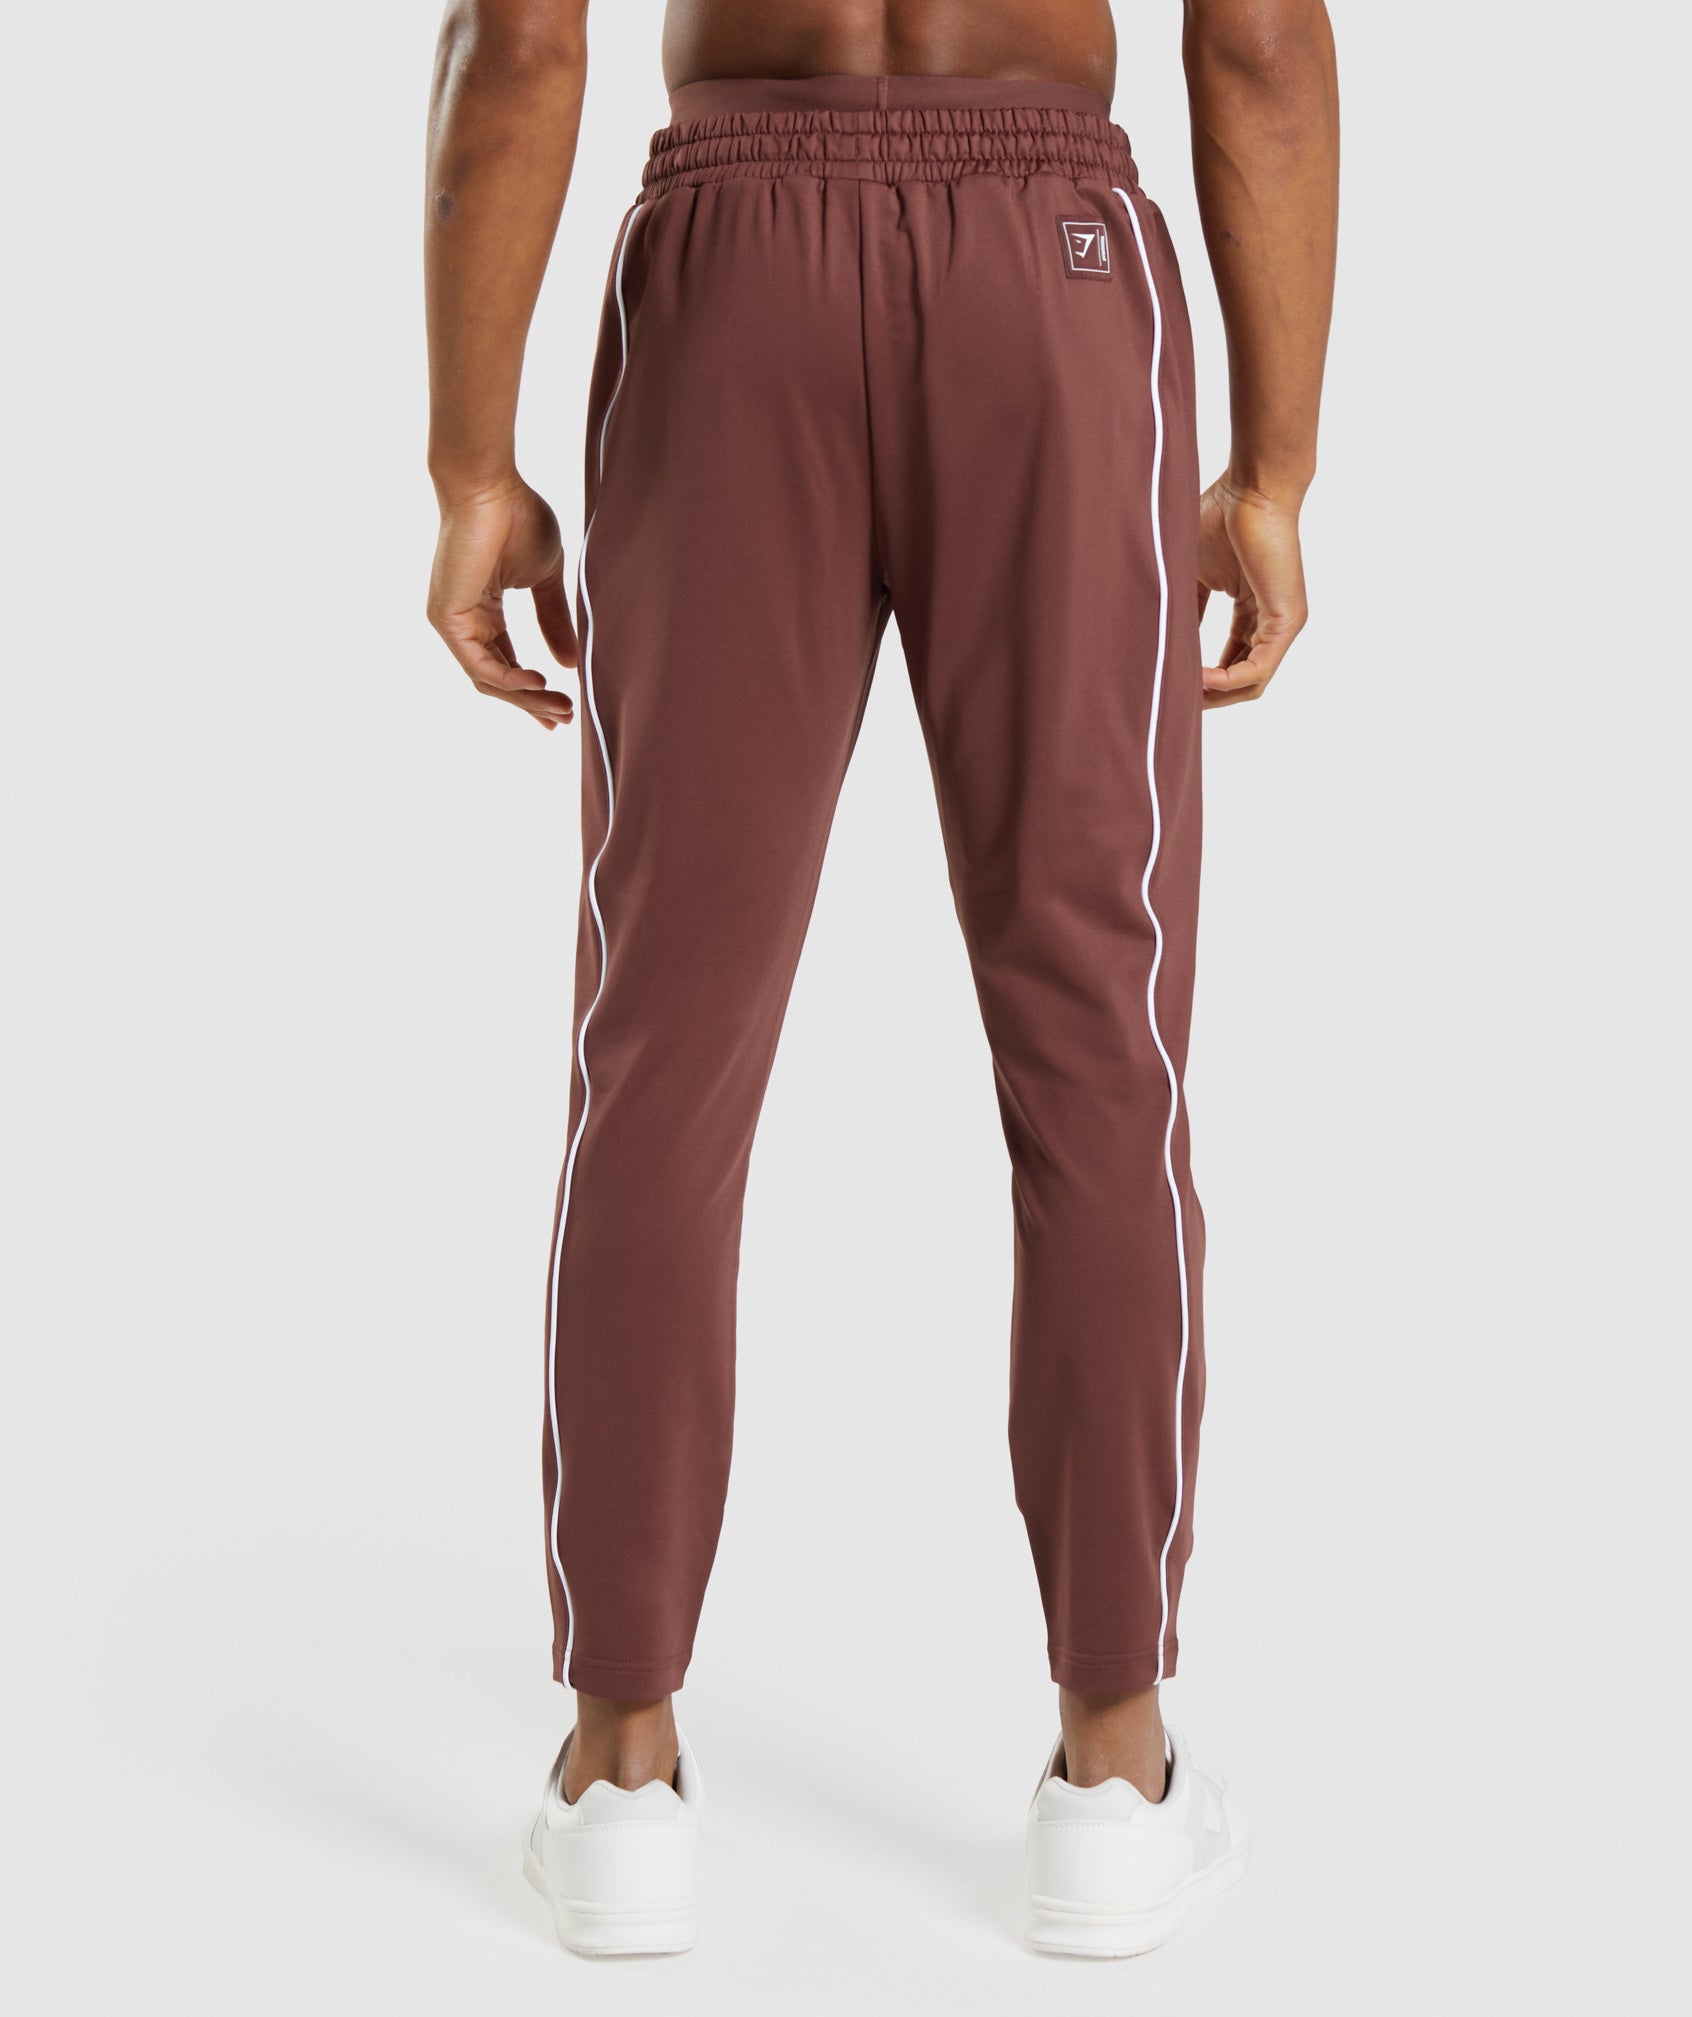 Recess Joggers in Cherry Brown/White